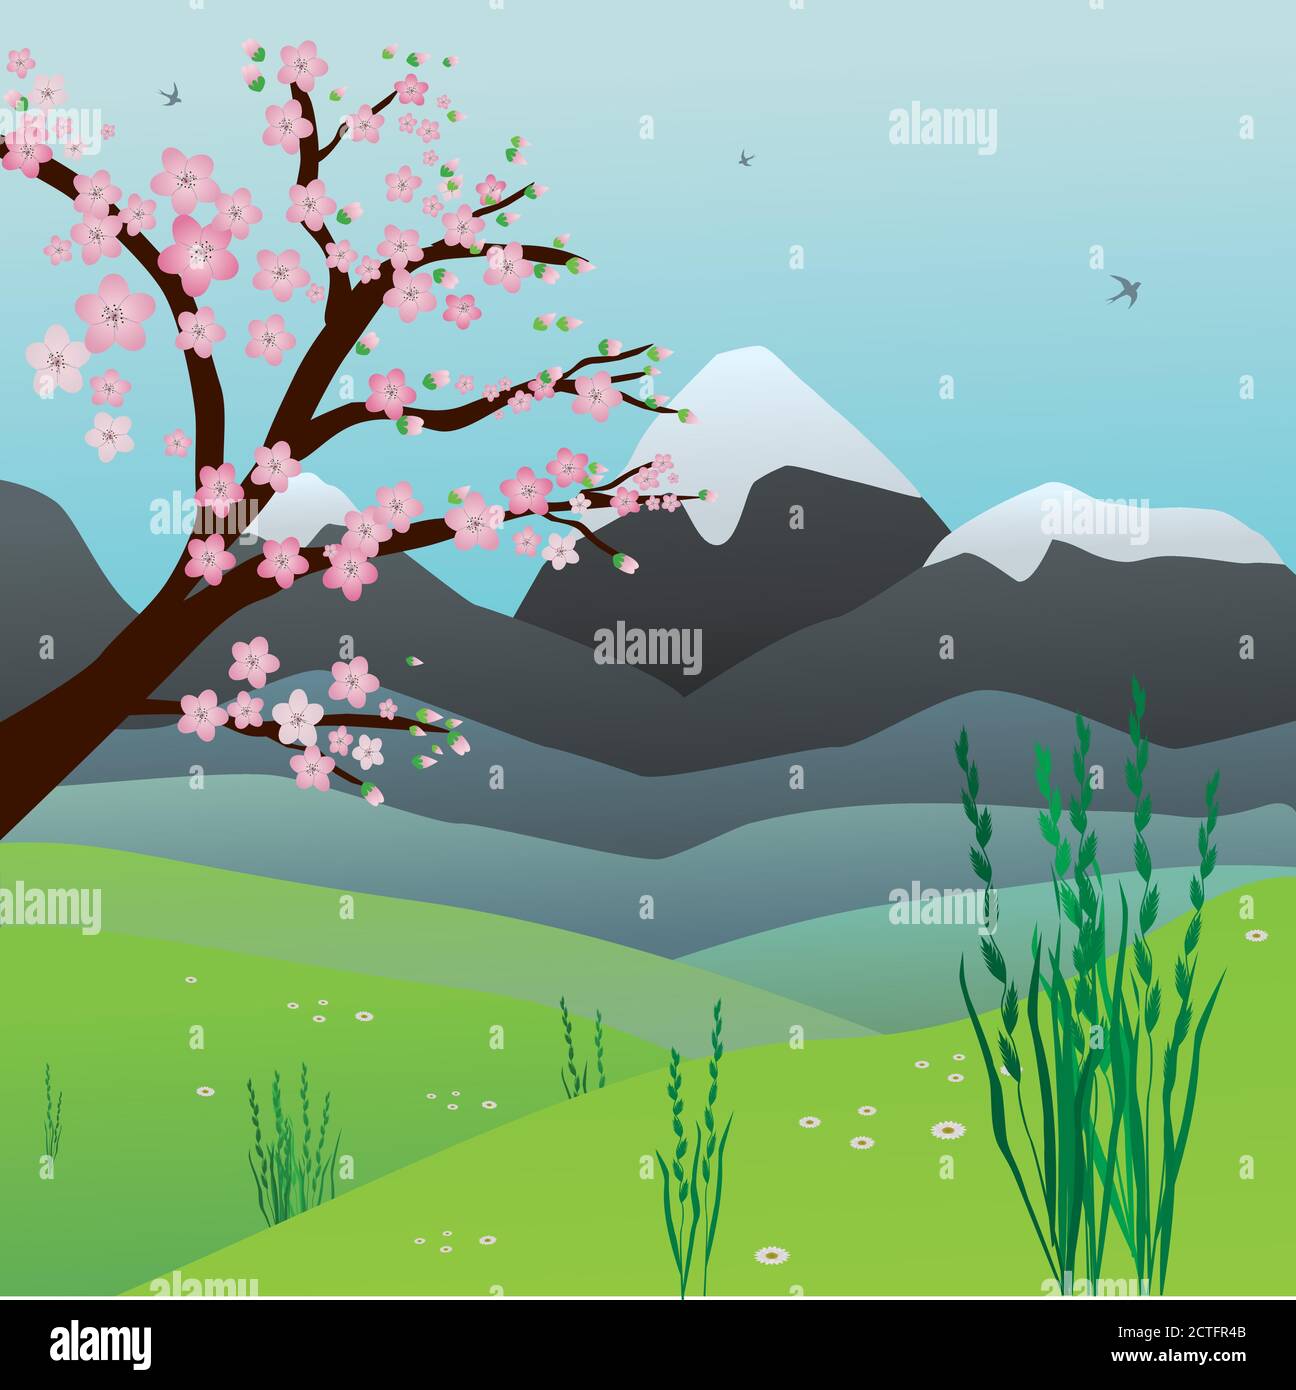 Landscape with hills, grass and a blossom tree.The sky is blue. In the sky there are birds flying. Stock Vector